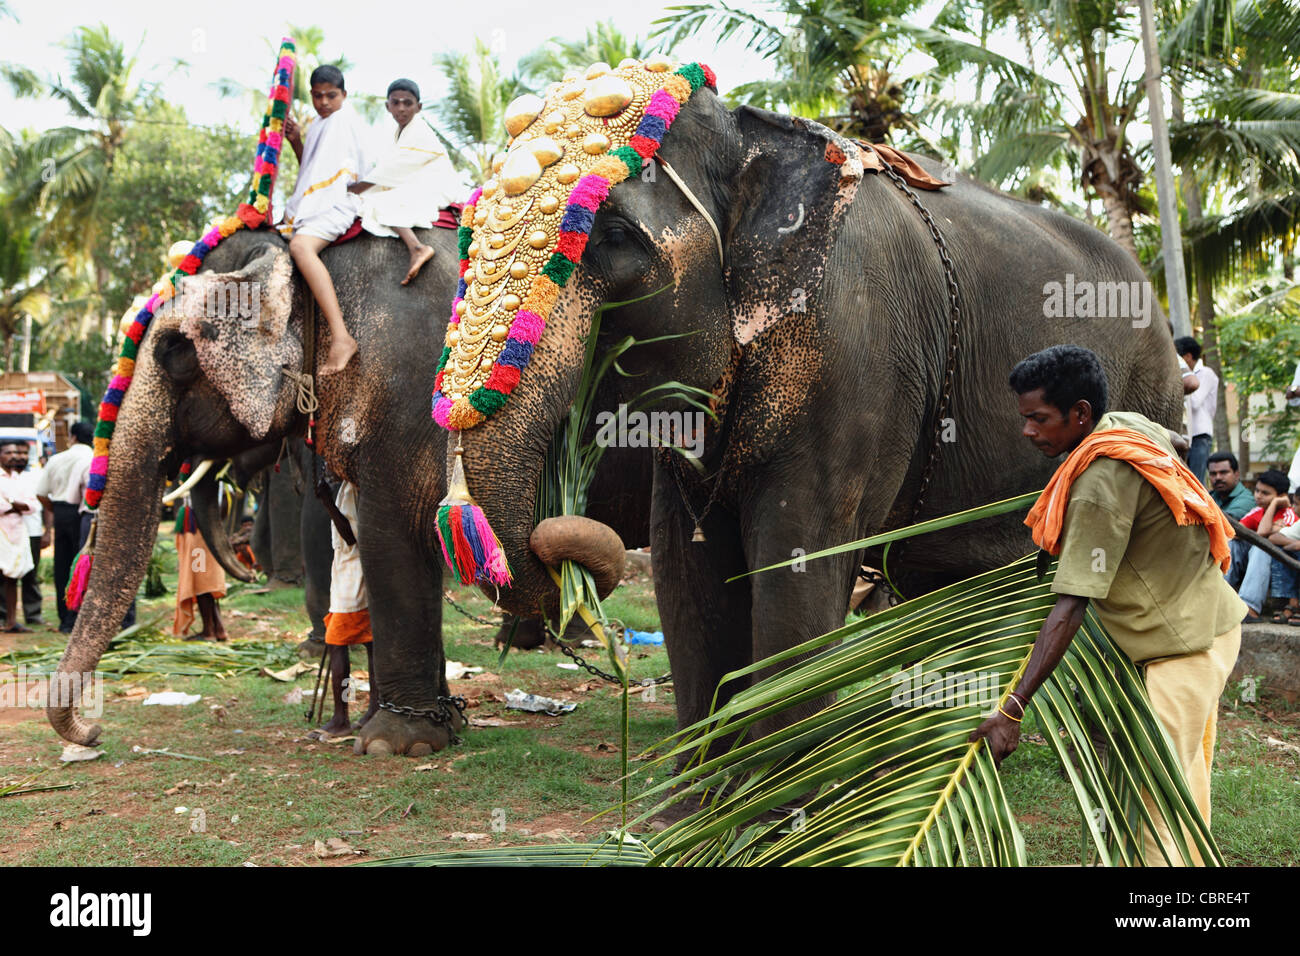 A temple festival in Varkala, Kerala, India, with the elephants being prepared for the parade. Stock Photo